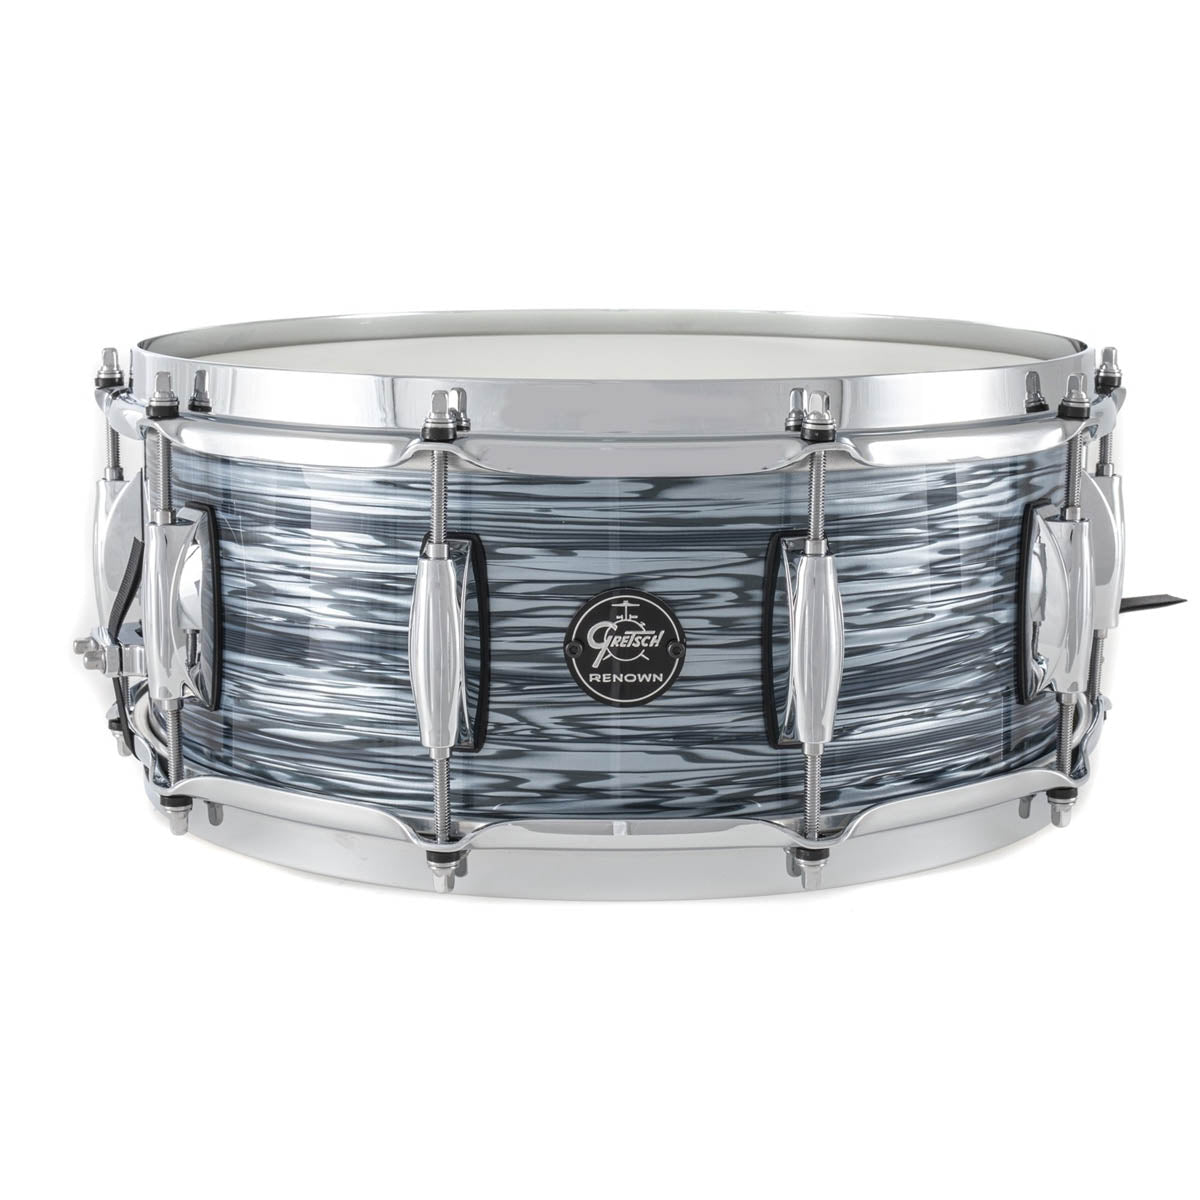 Gretsch Renown Maple 14"x5.5" Snare Drum in Silver Oyster Pearl